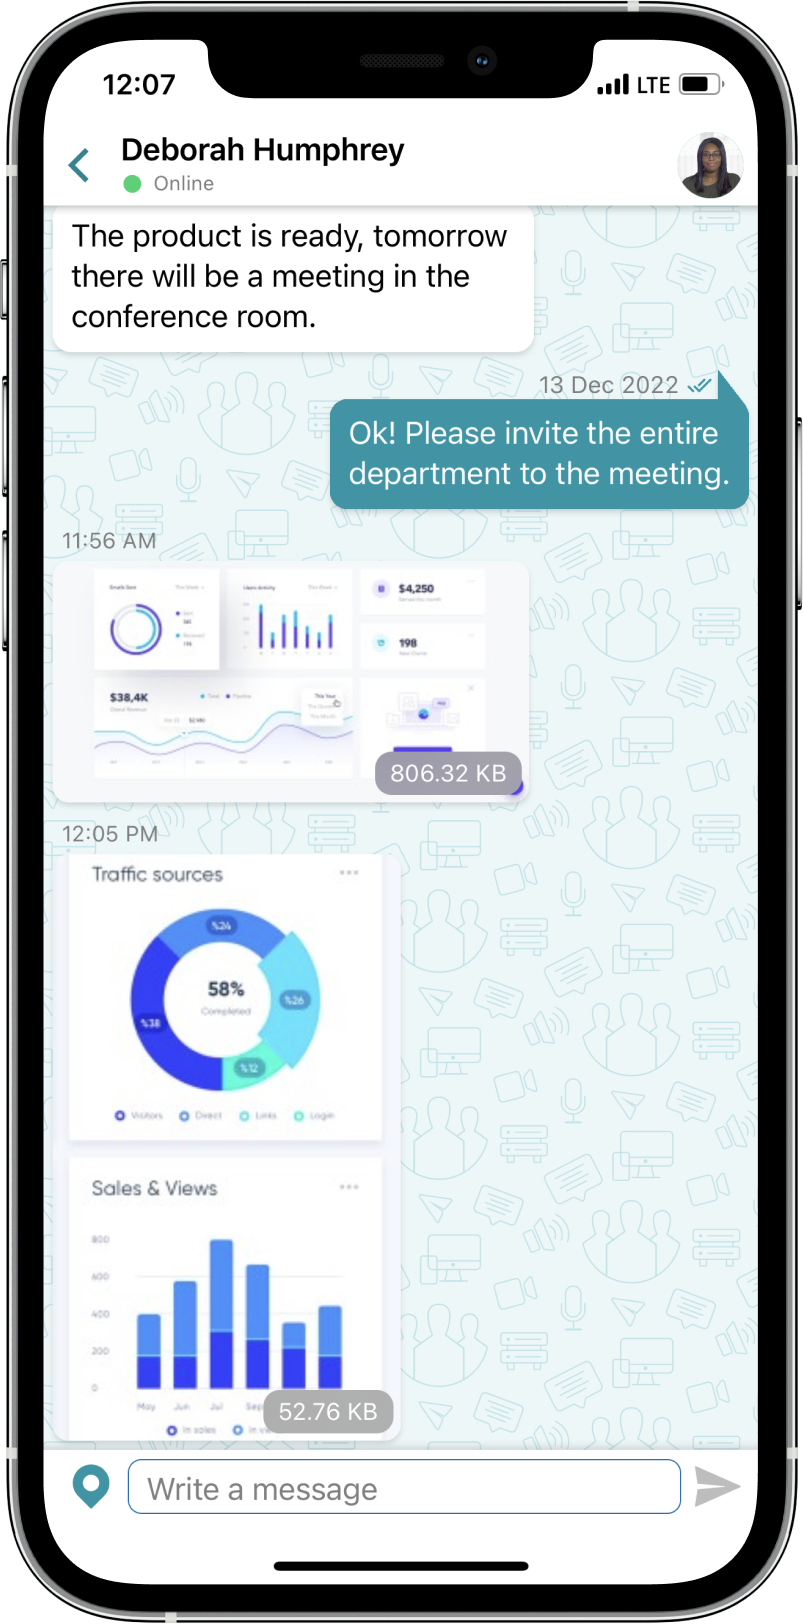 TrueConf 3.3 for iOS: new UI, Smart meeting mode, offline access to chats, contacts, and call history 14